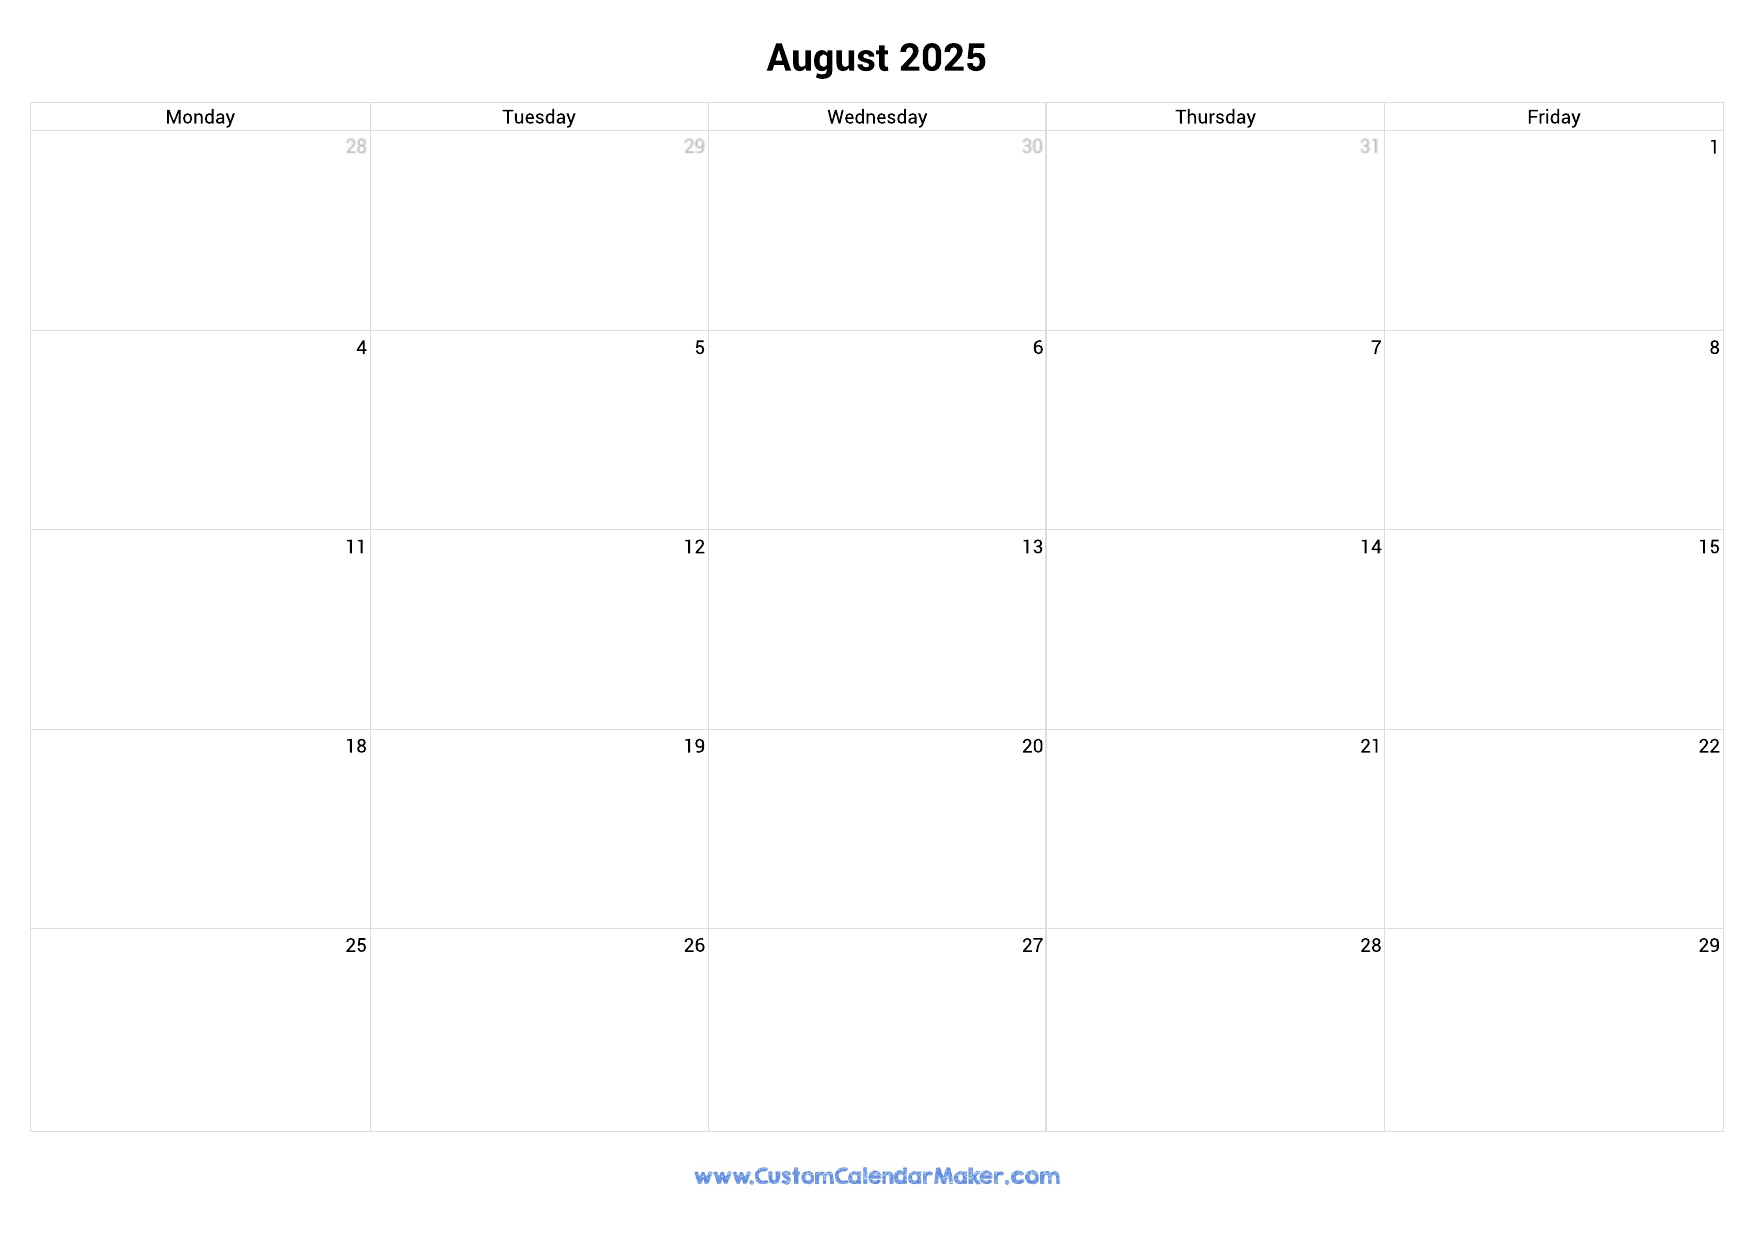 august-2025-calendar-weekdays-only-monday-to-friday